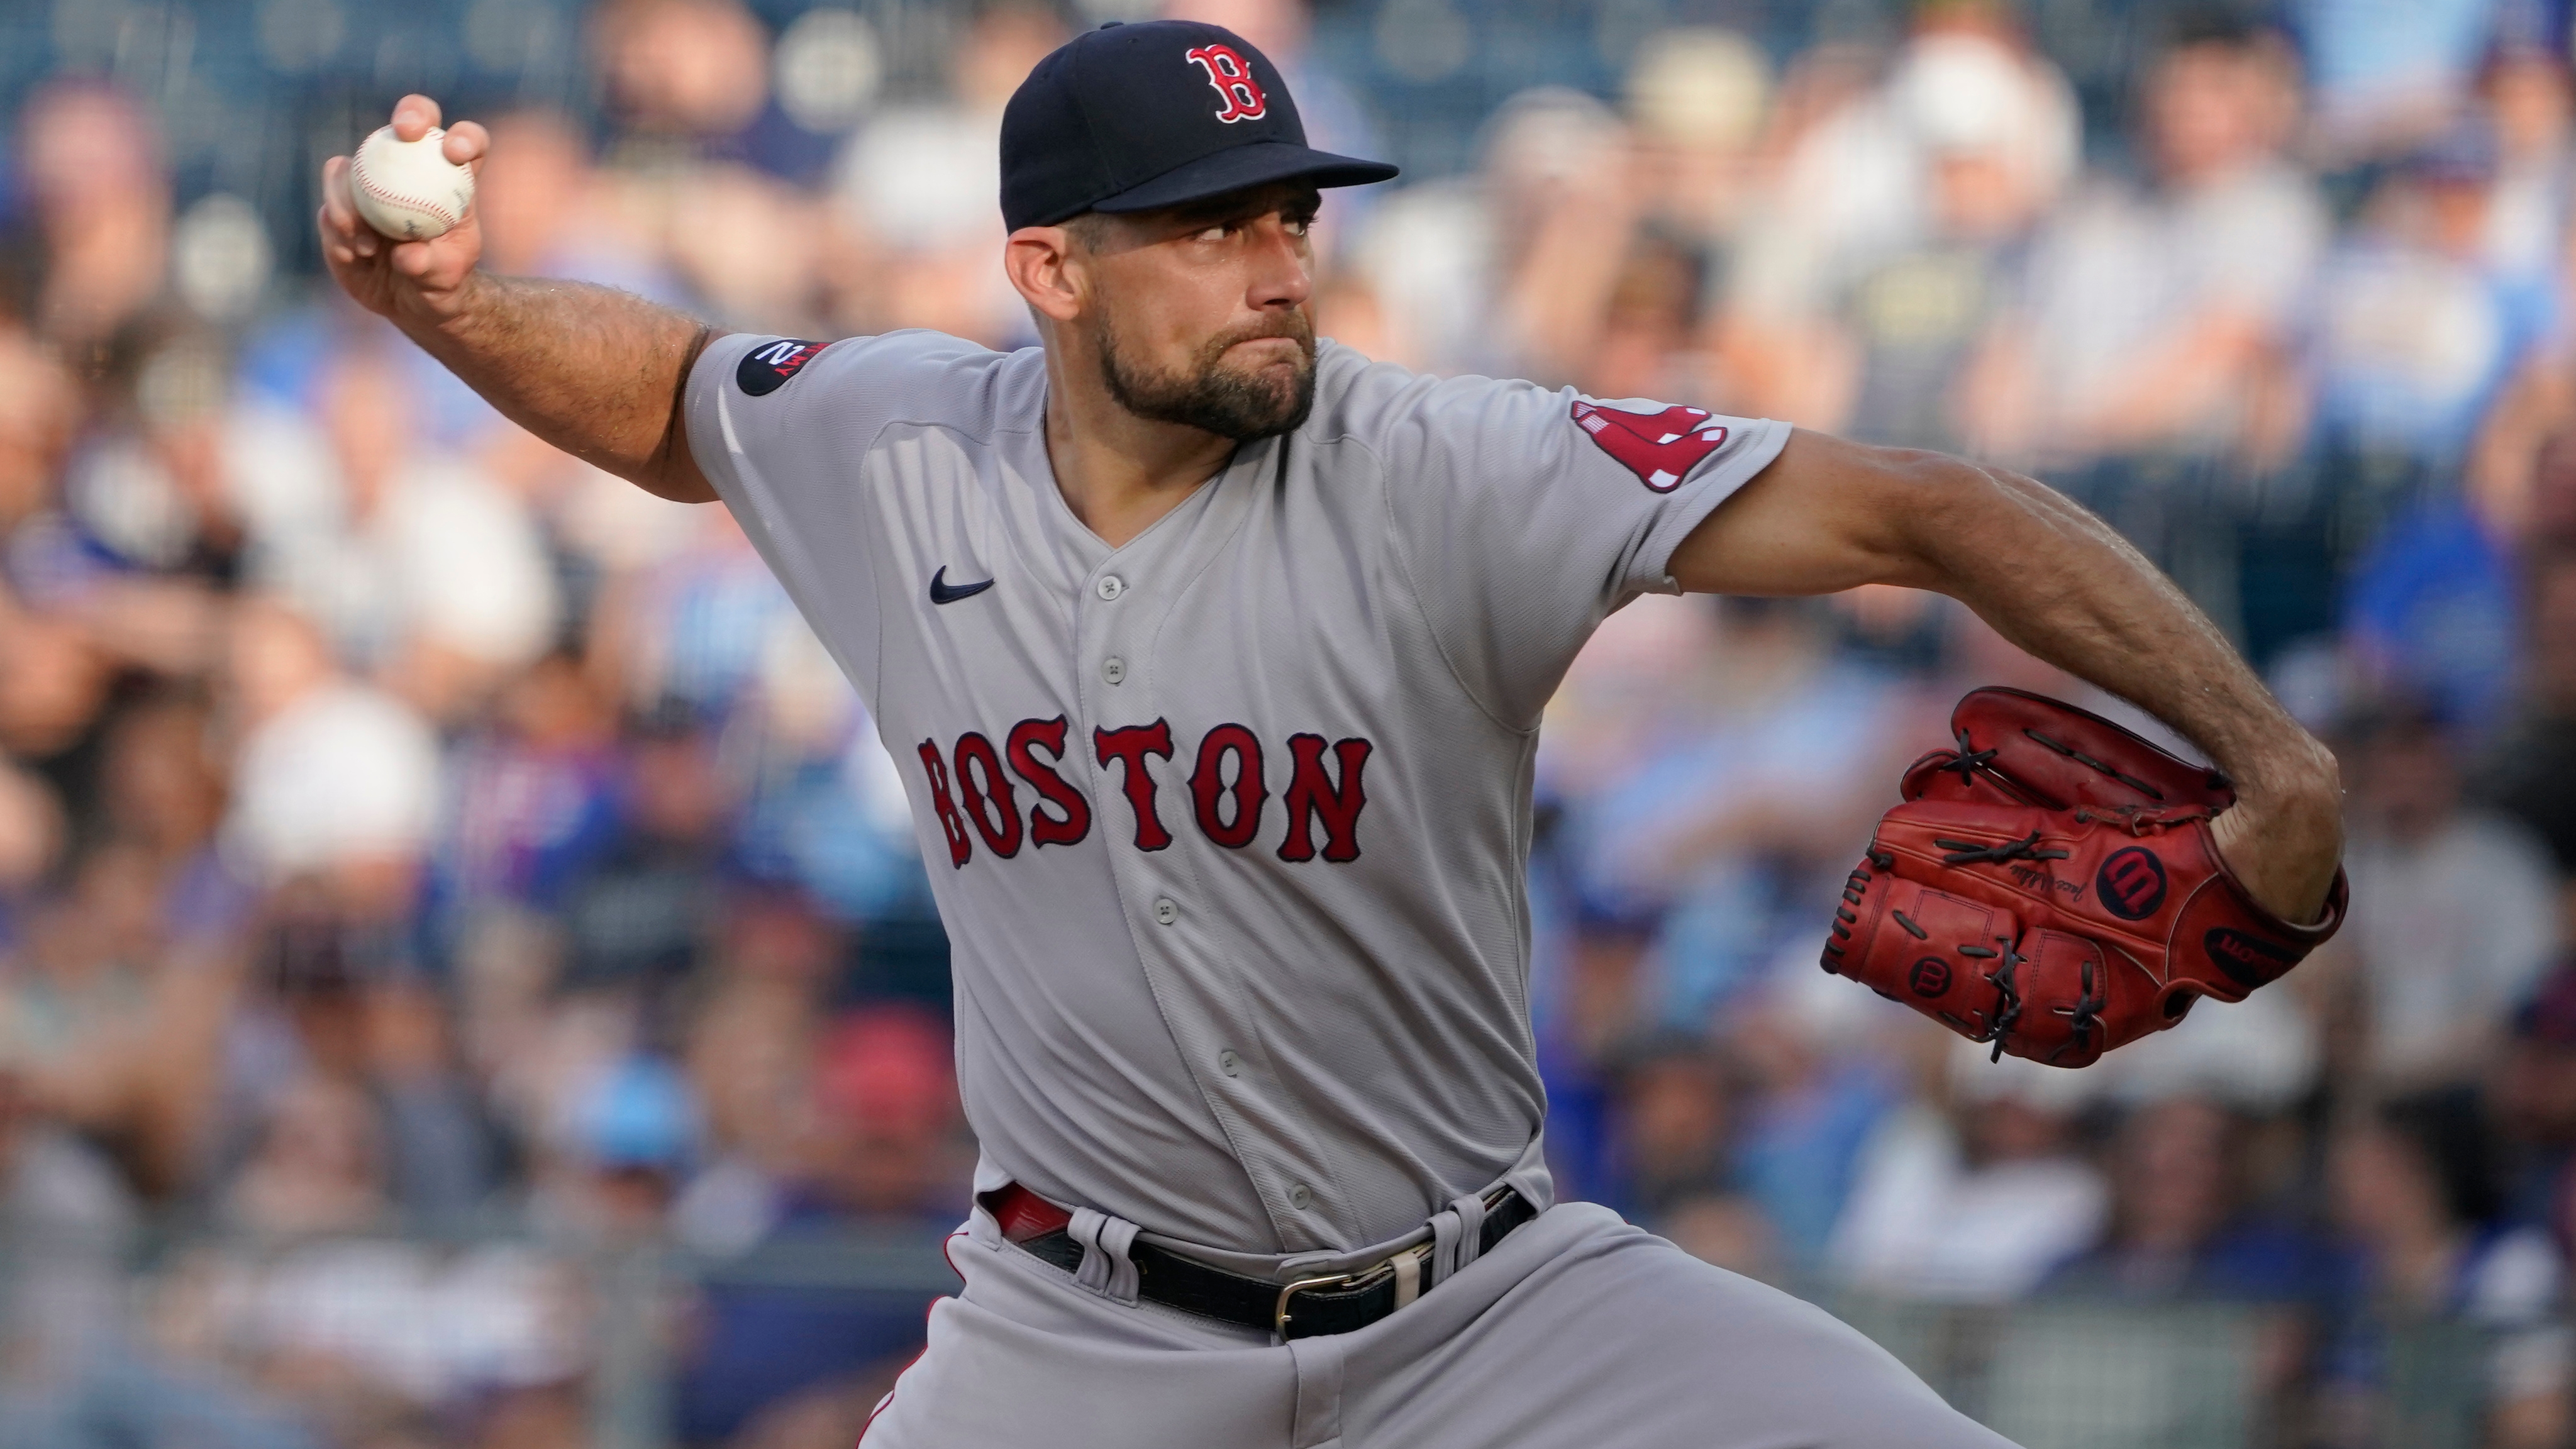 AP source: Nate Eovaldi agrees to multiyear deal with Rangers